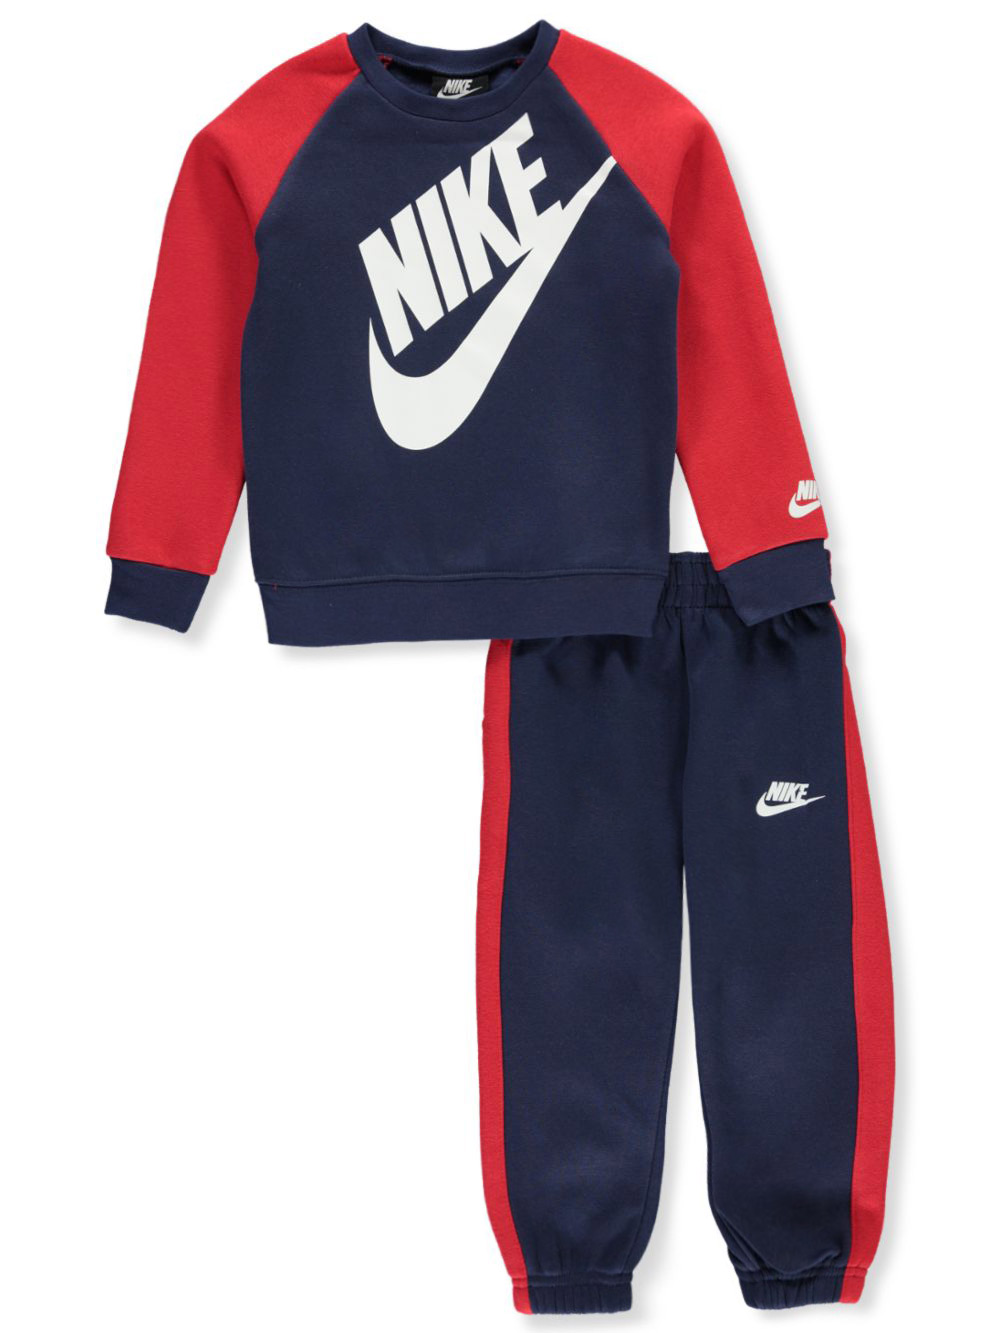 blue and red nike sweatsuit